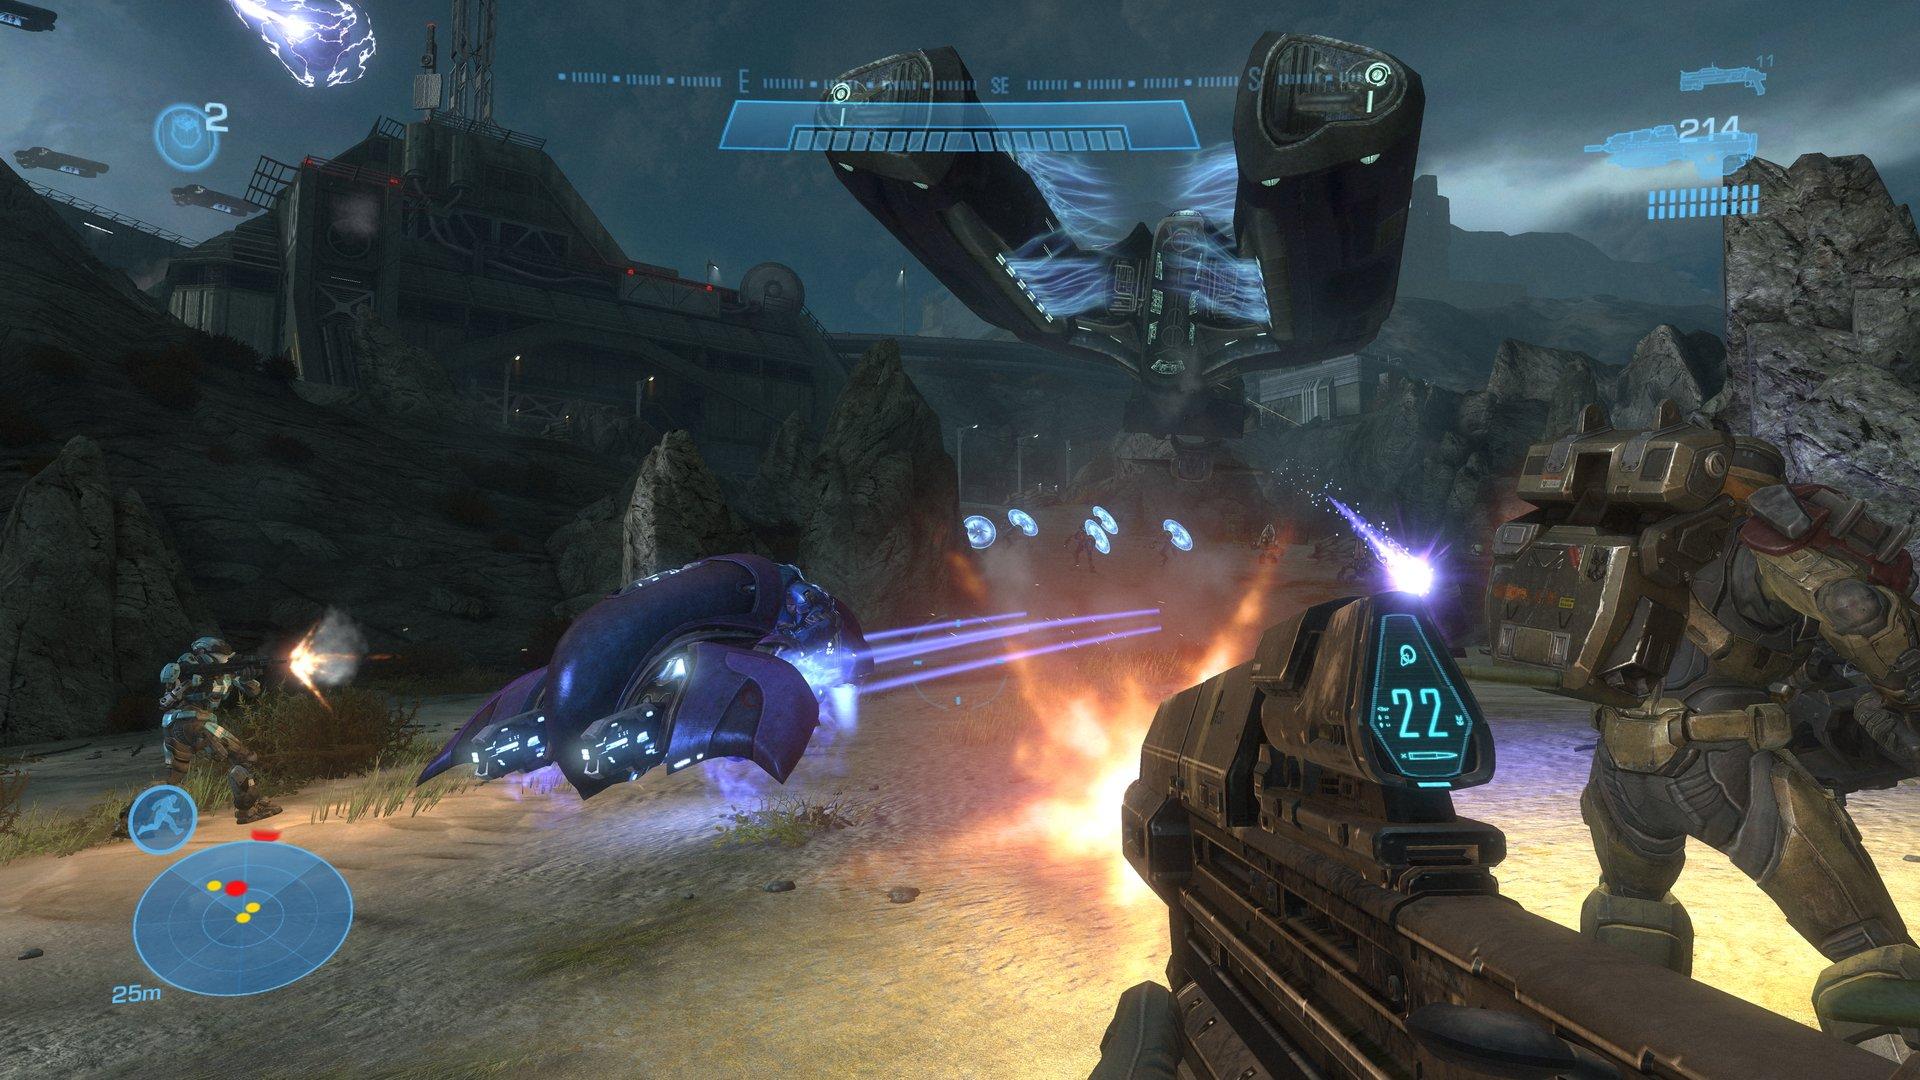 Download Halo 3 For Xbox 360 For Free Legally [Limited Time Only]